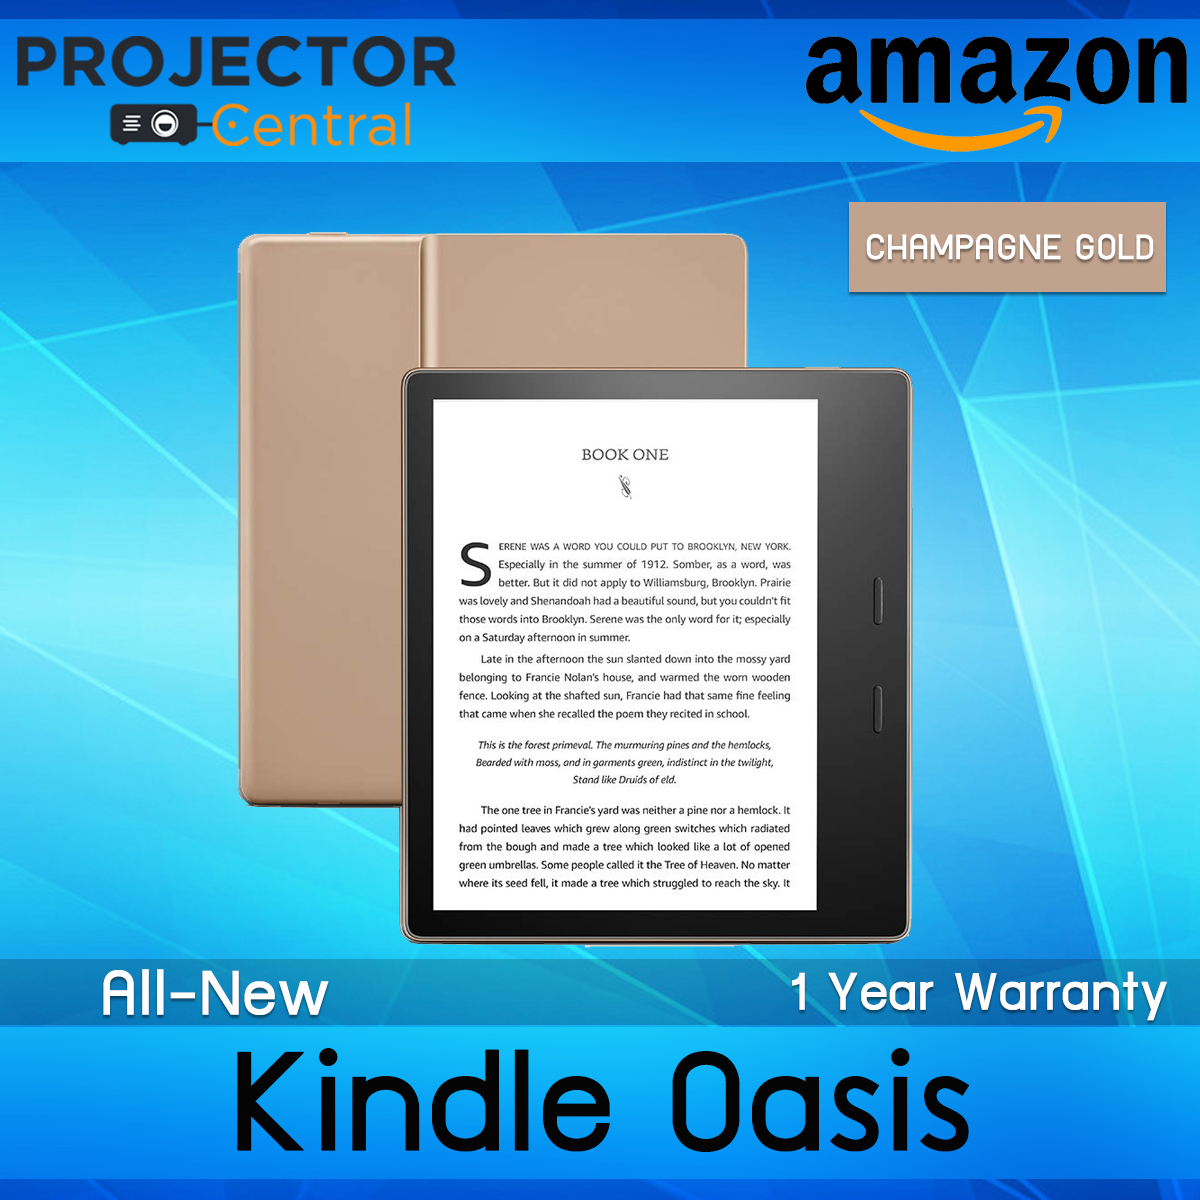 Amazon Kindle Oasis E-reader 2019 , 7 High-Resolution Display (300 ppi), Waterproof, Built-In Audible, Wi-Fi (Includes Special Offers)